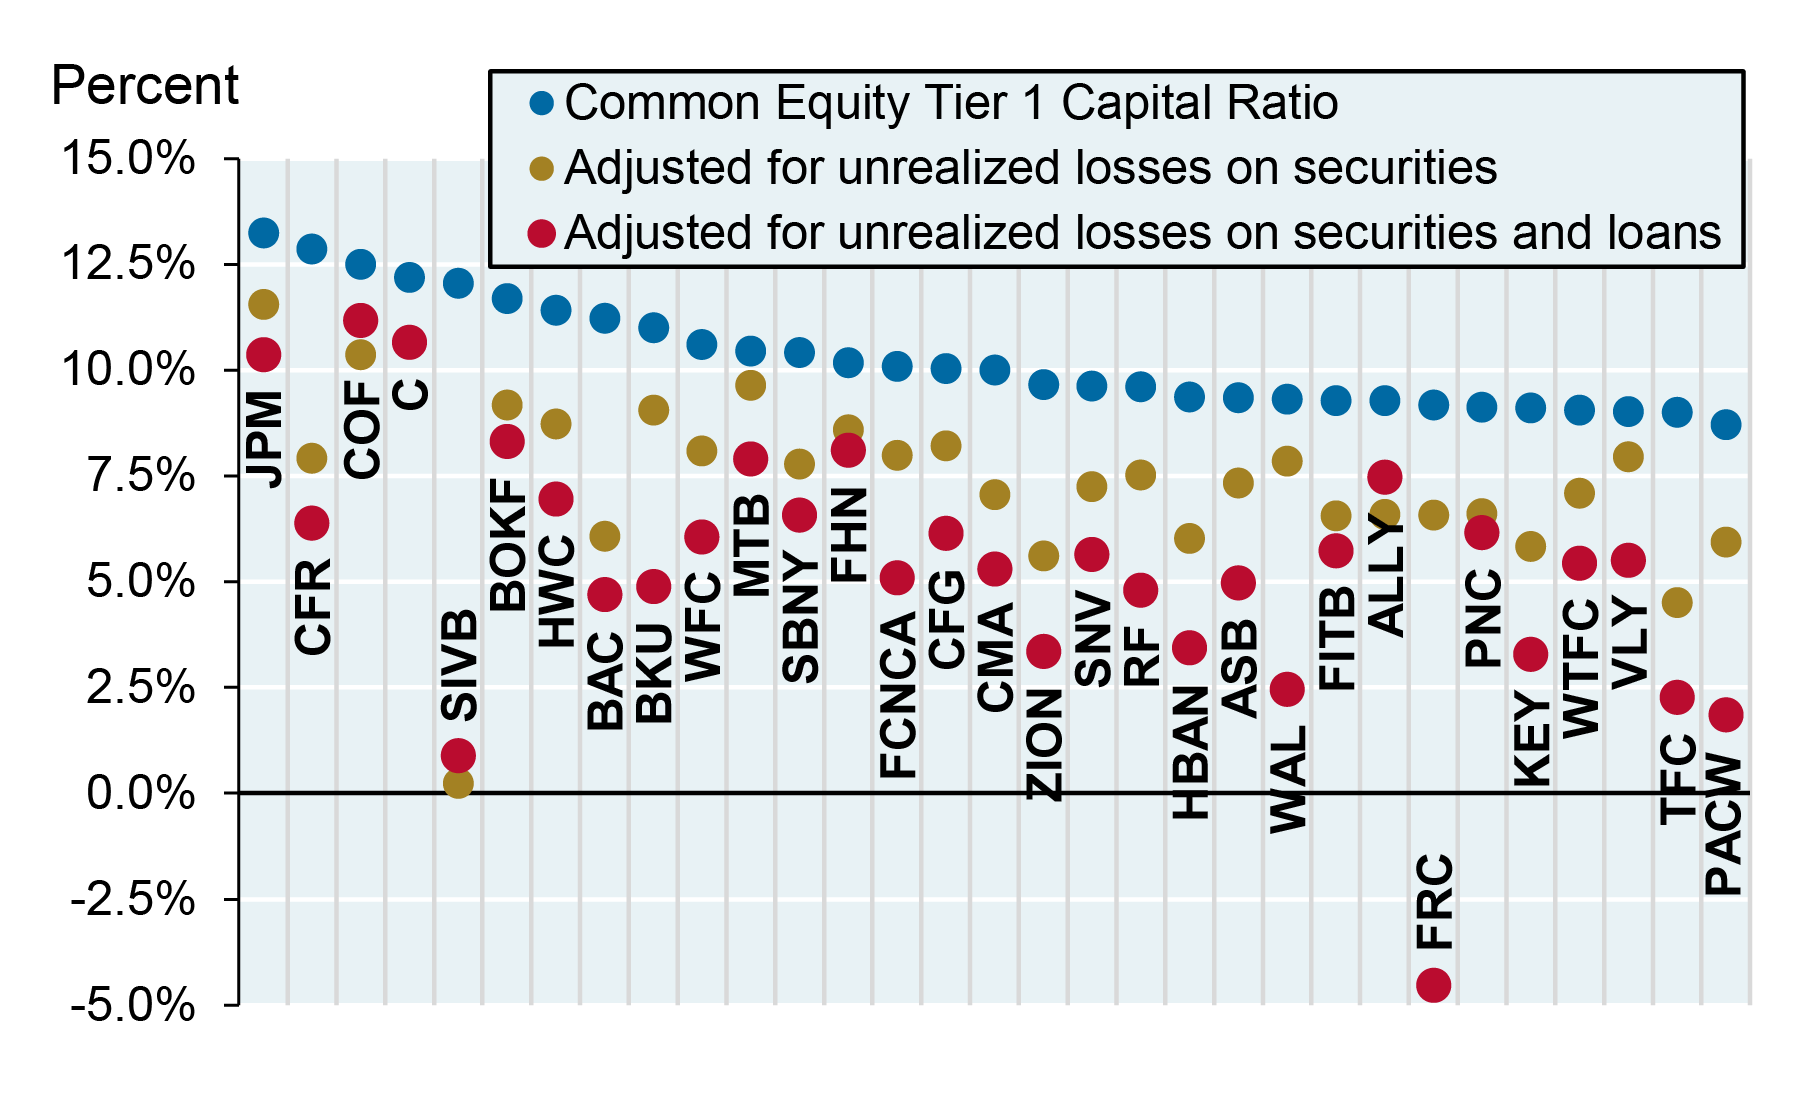  The aggregate Tier 1 capital ratios and loan to deposit ratios for US banks.